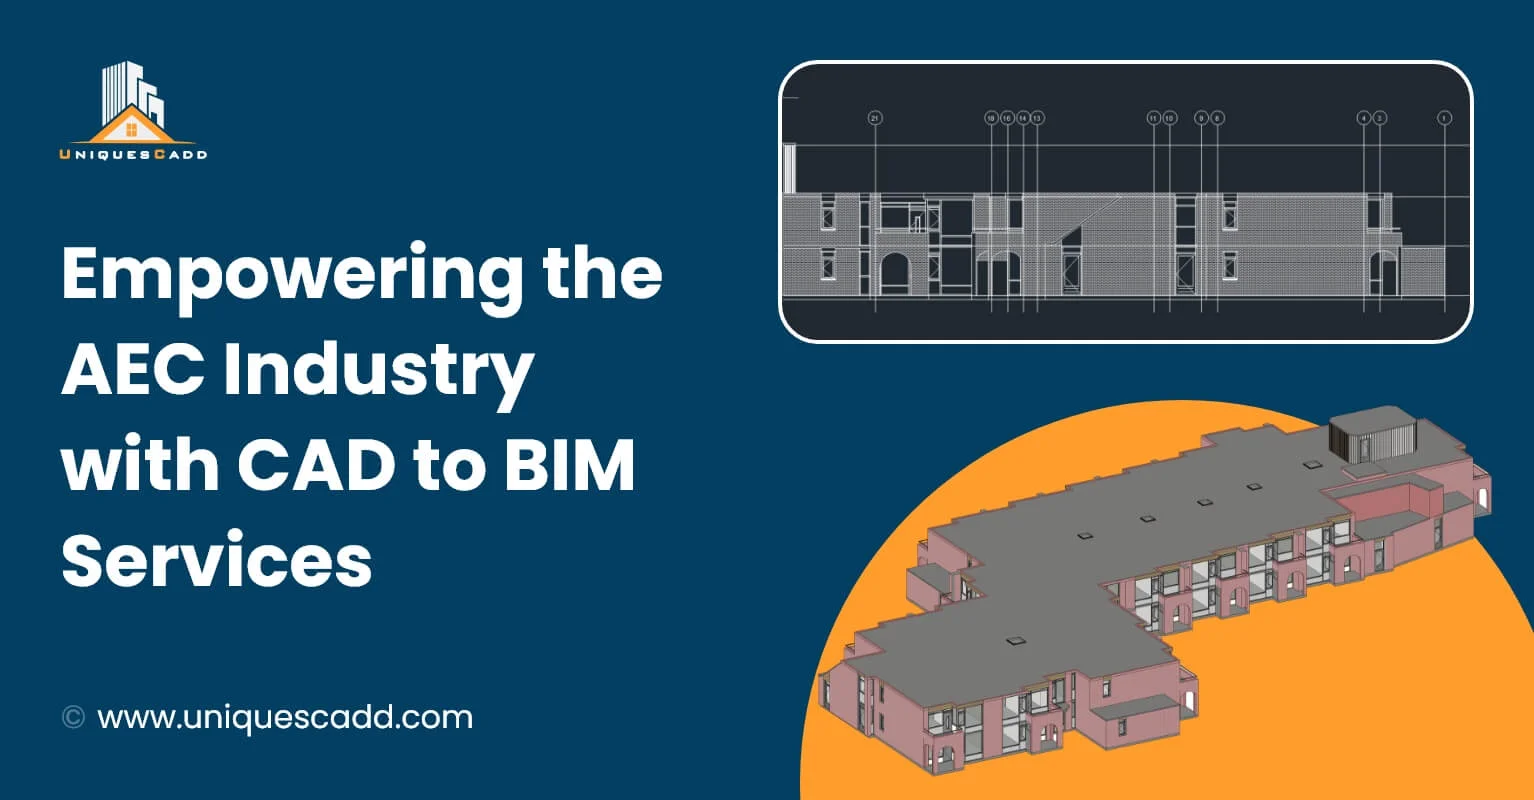 Empowering the AEC Industry with CAD to BIM Services